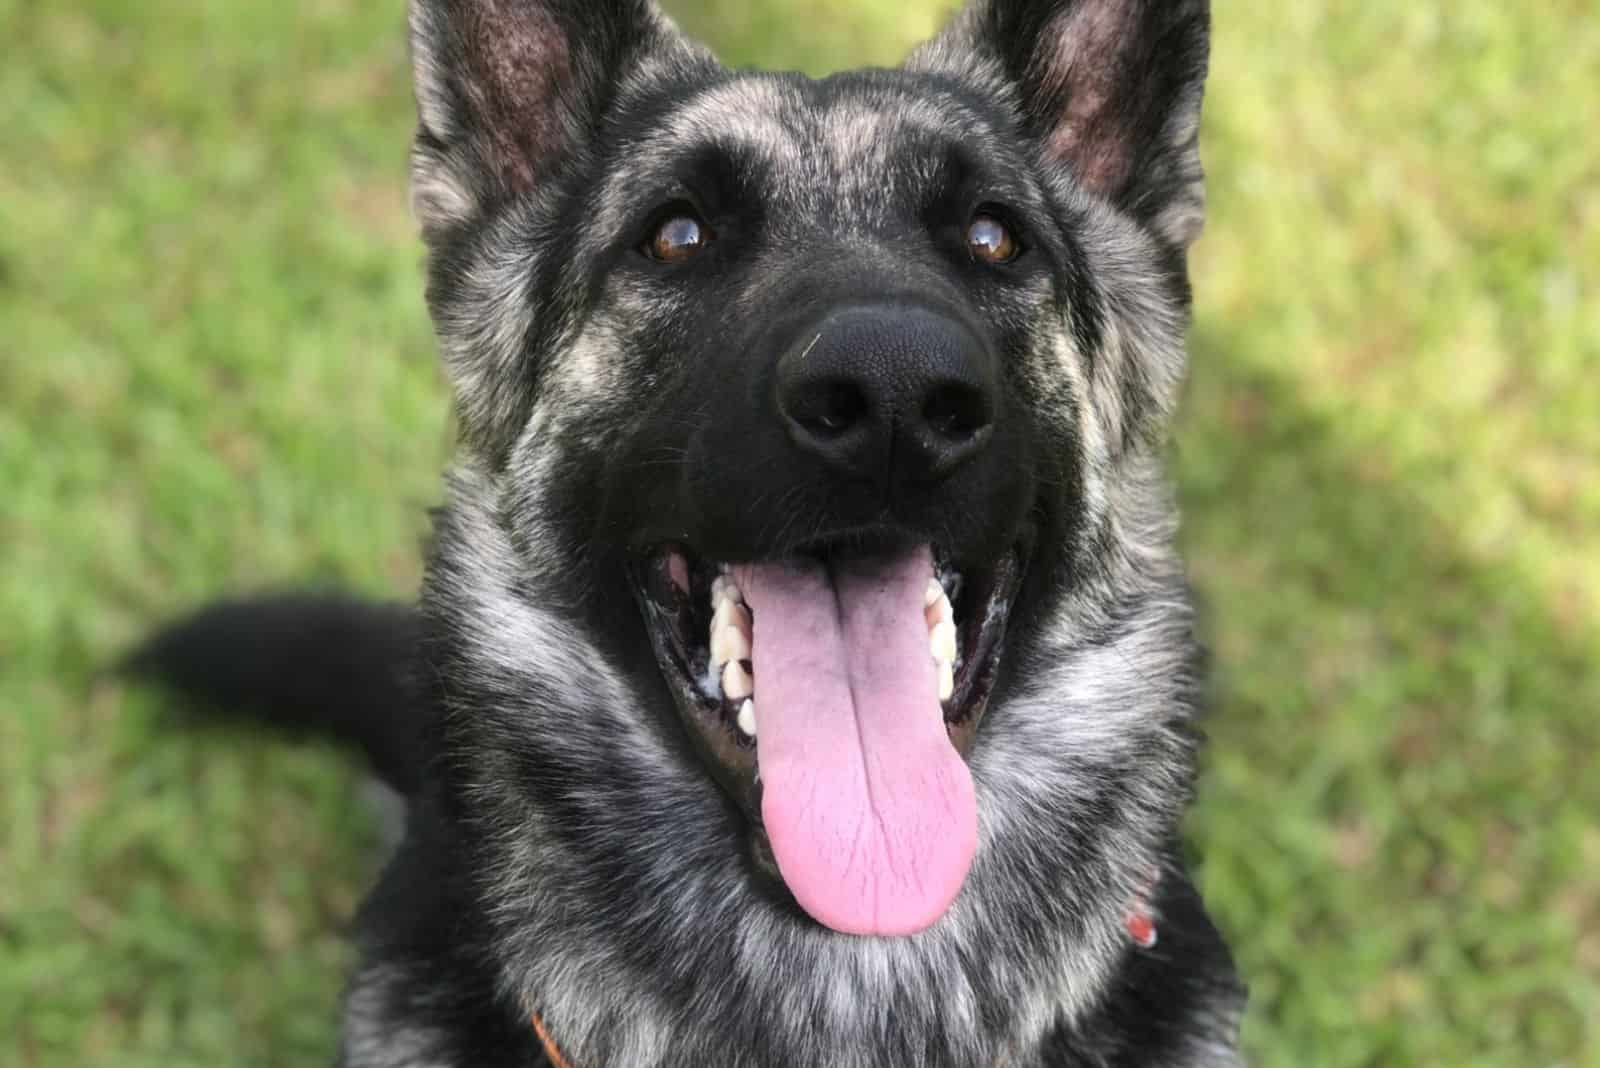 brindle German Shepherd with silver and black color in close up image